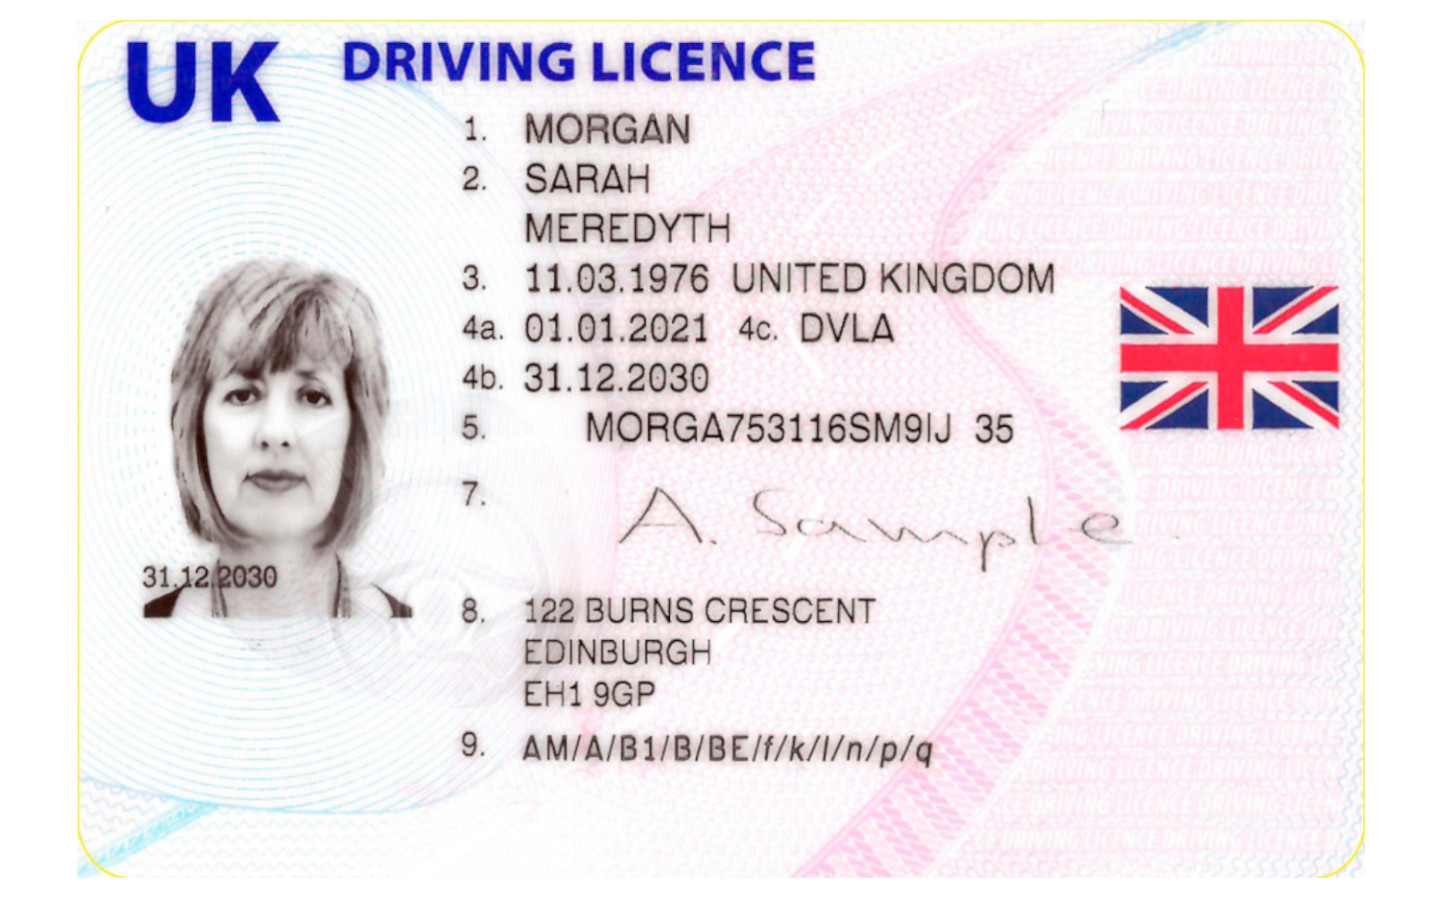 EU flag removed from driving licences a year on from Brexit